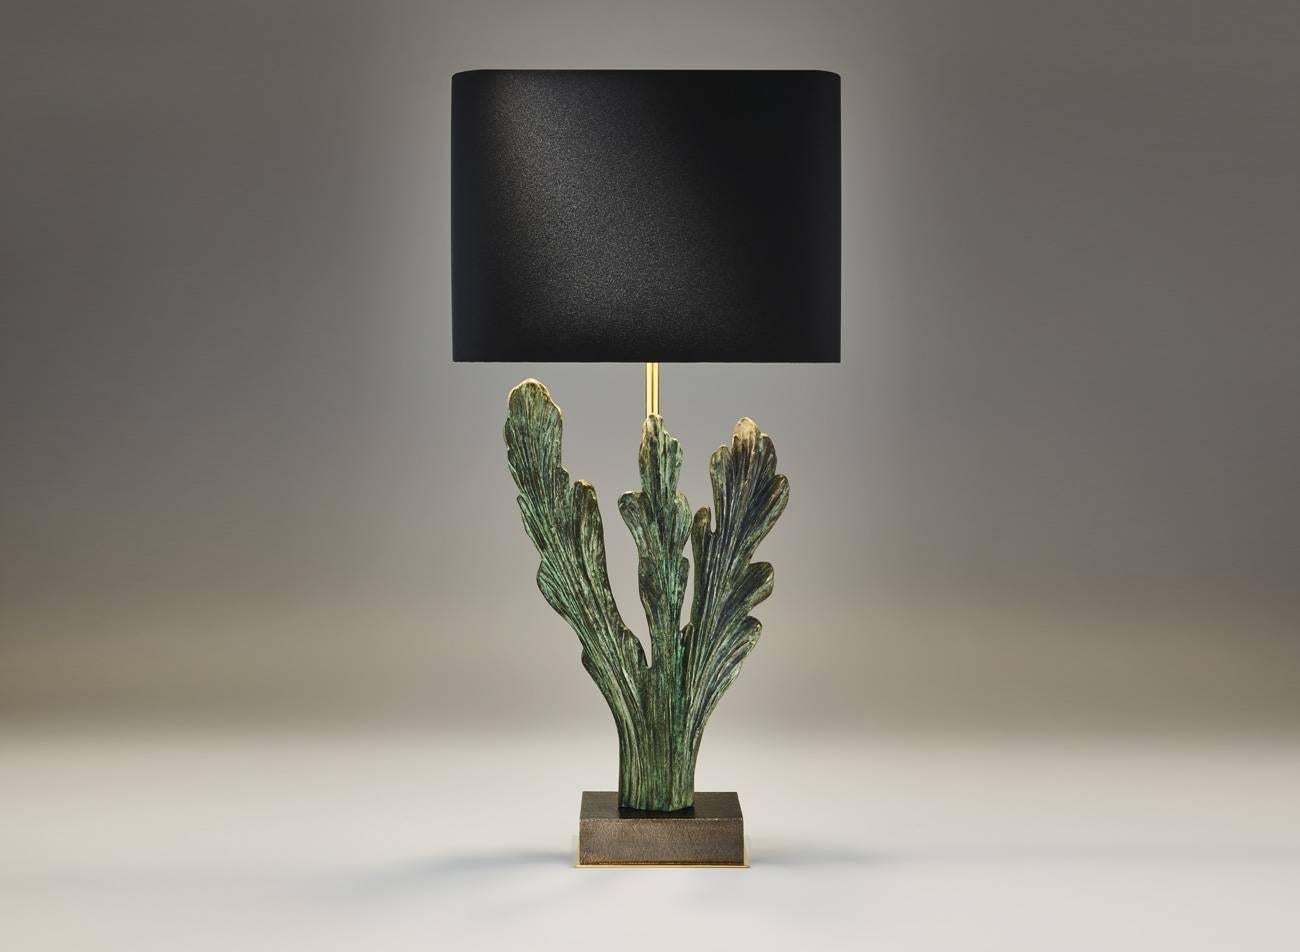 Thalassa table lamp
Design by Chrystiane Charles
Made by Charles Paris
Made of bronze and brass.

             